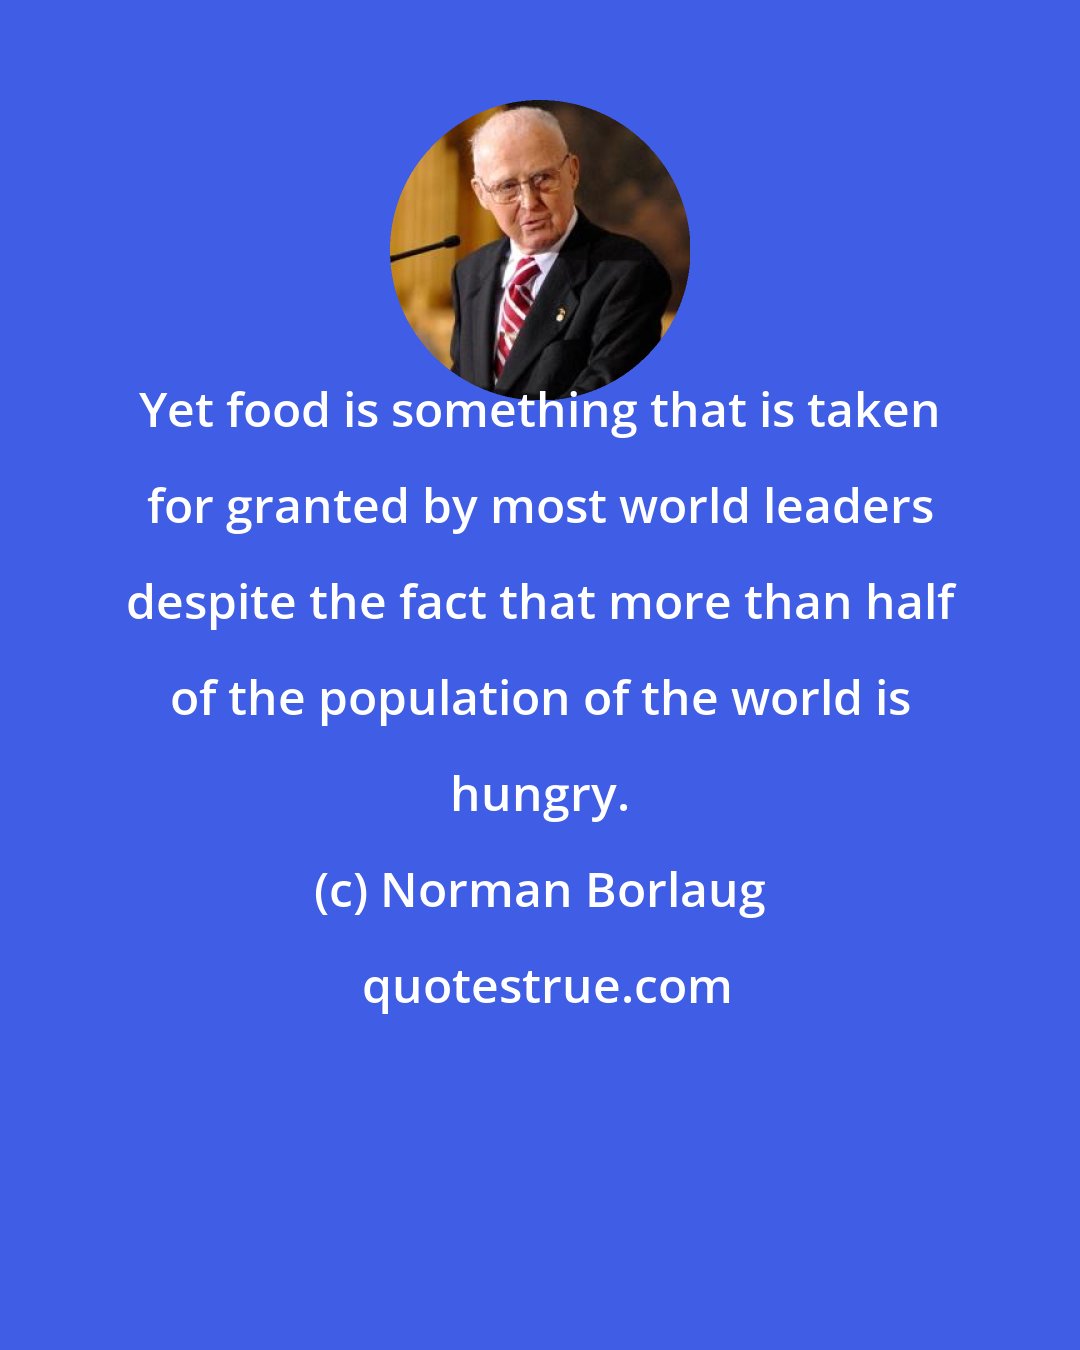 Norman Borlaug: Yet food is something that is taken for granted by most world leaders despite the fact that more than half of the population of the world is hungry.